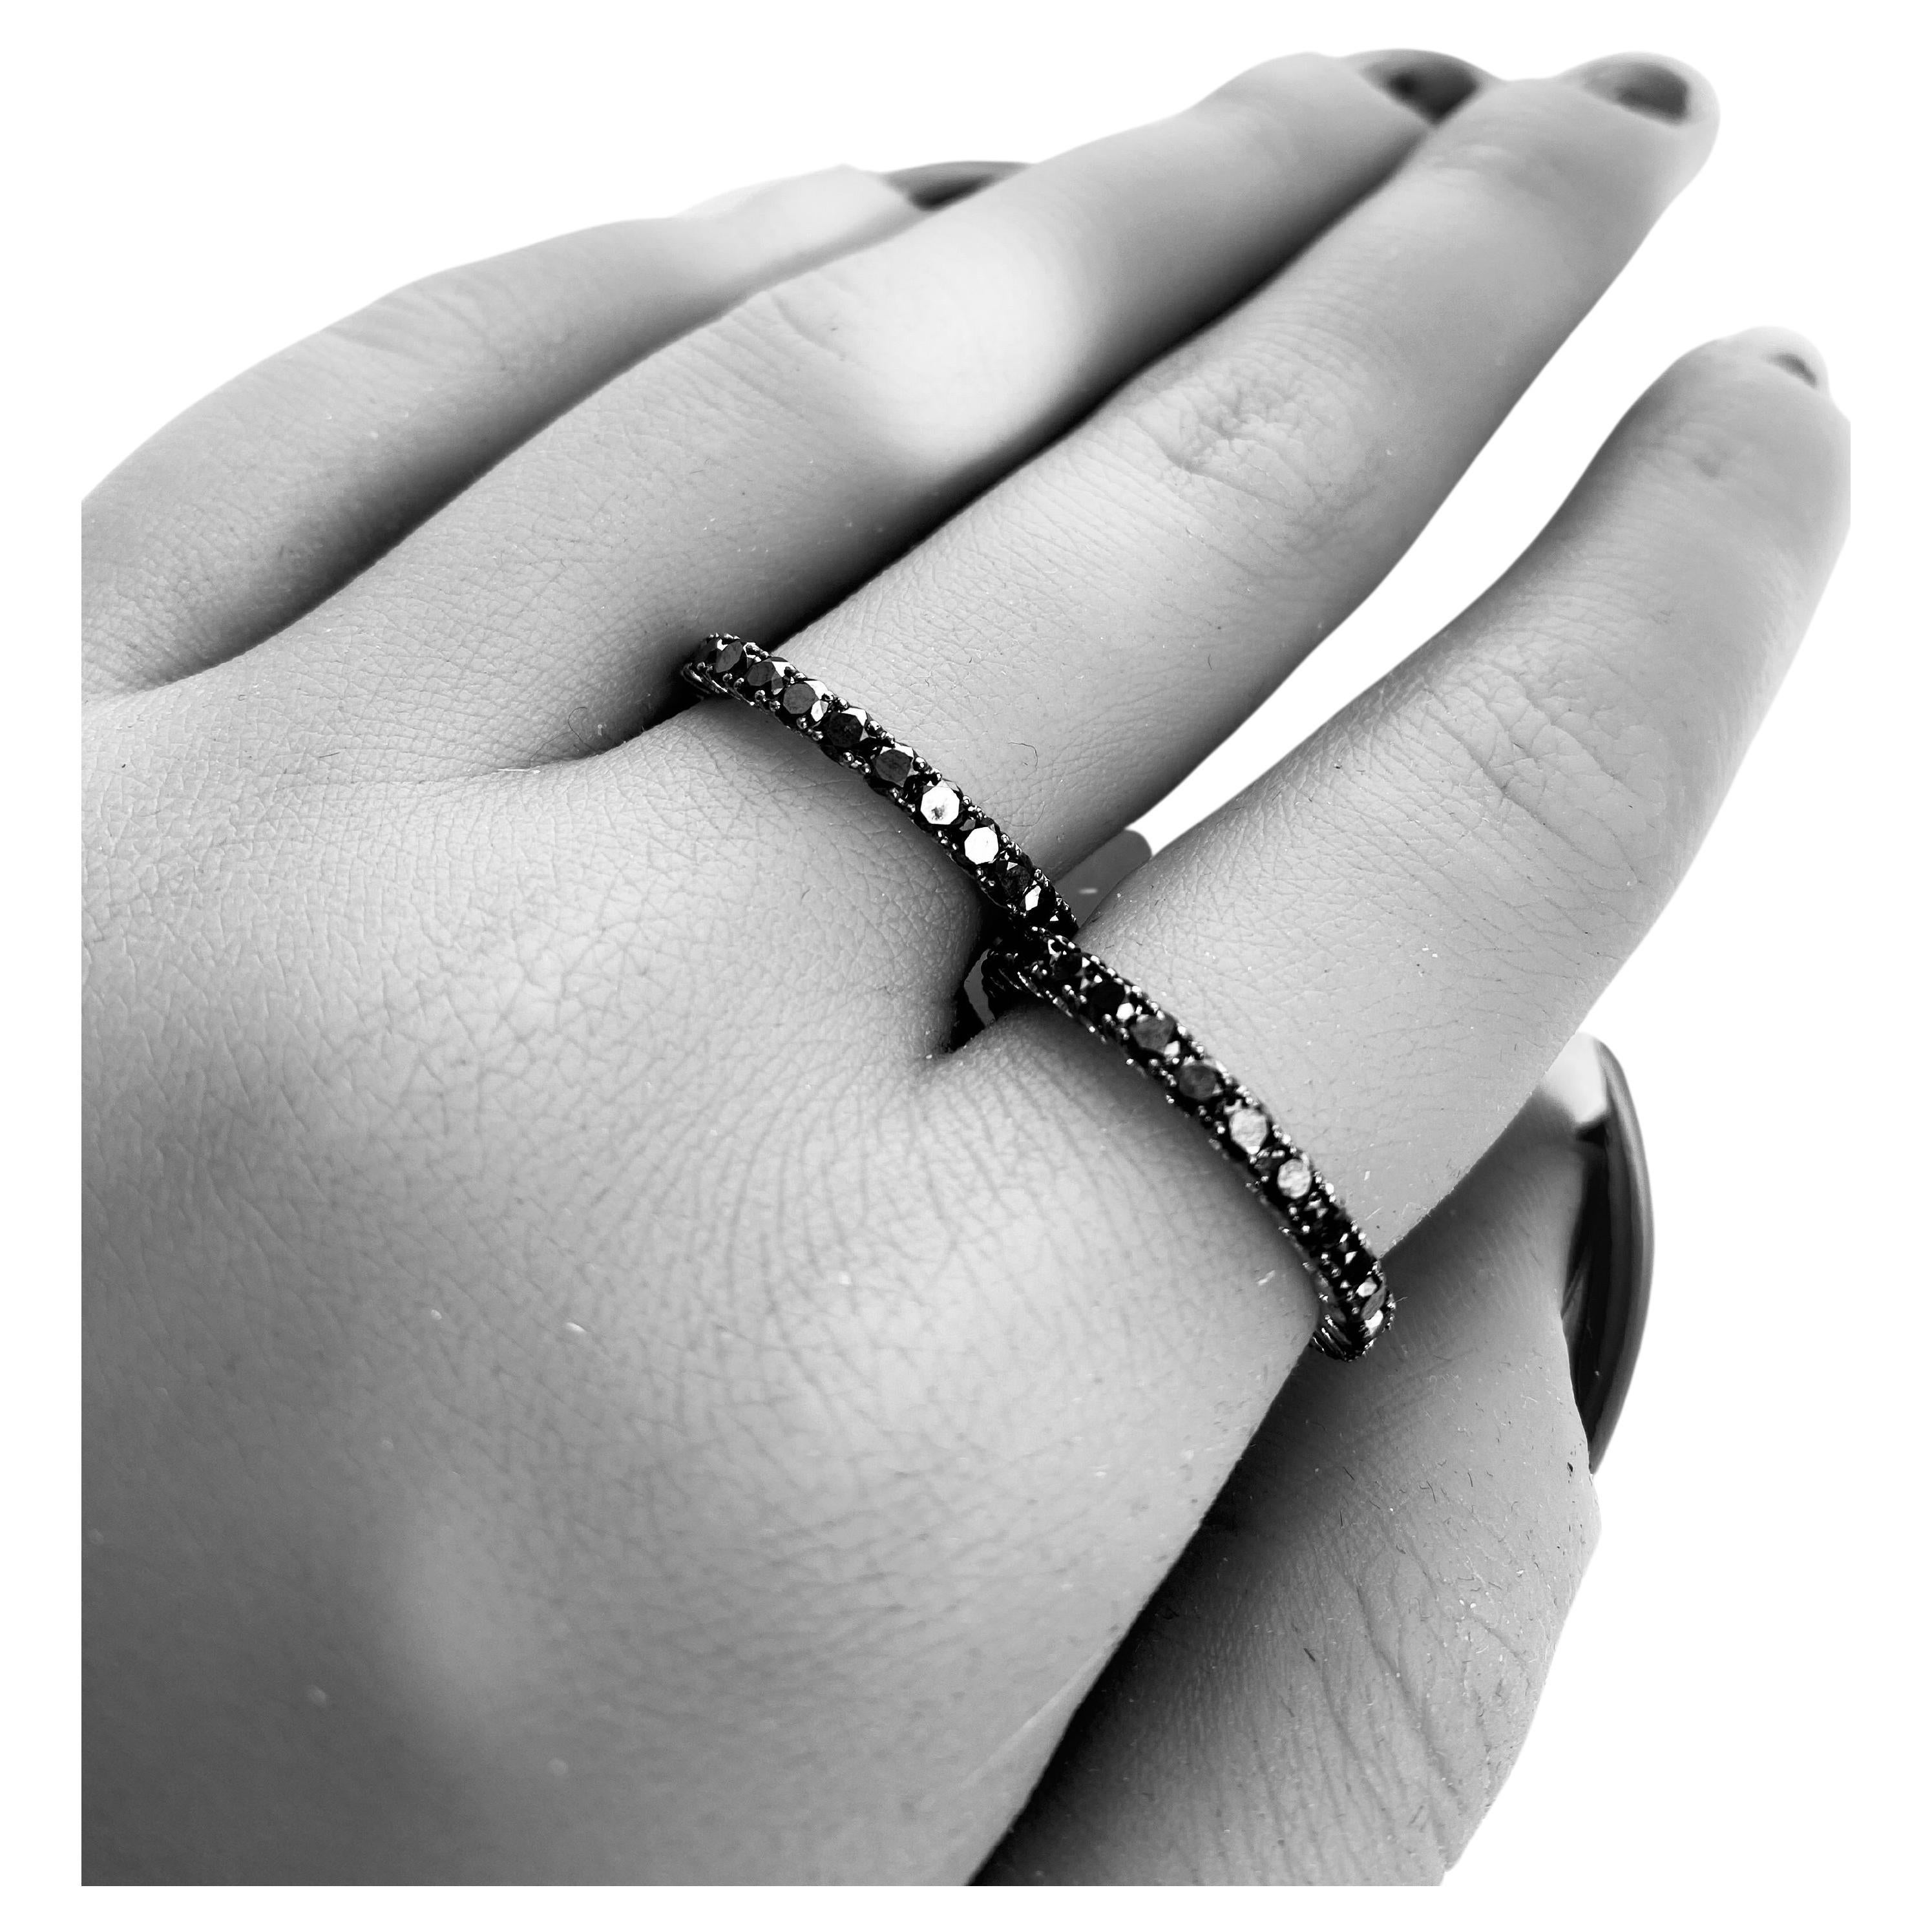 Round black diamond eternity bands made in 14k solid white gold. Stackable eternity rings for every occasion! 

** Each item is sold separately **

2.4mm-
14K White gold- 1.38 grams 
Round Black Diamonds- 1.81cts / 2.4mm stones
Ring Size US